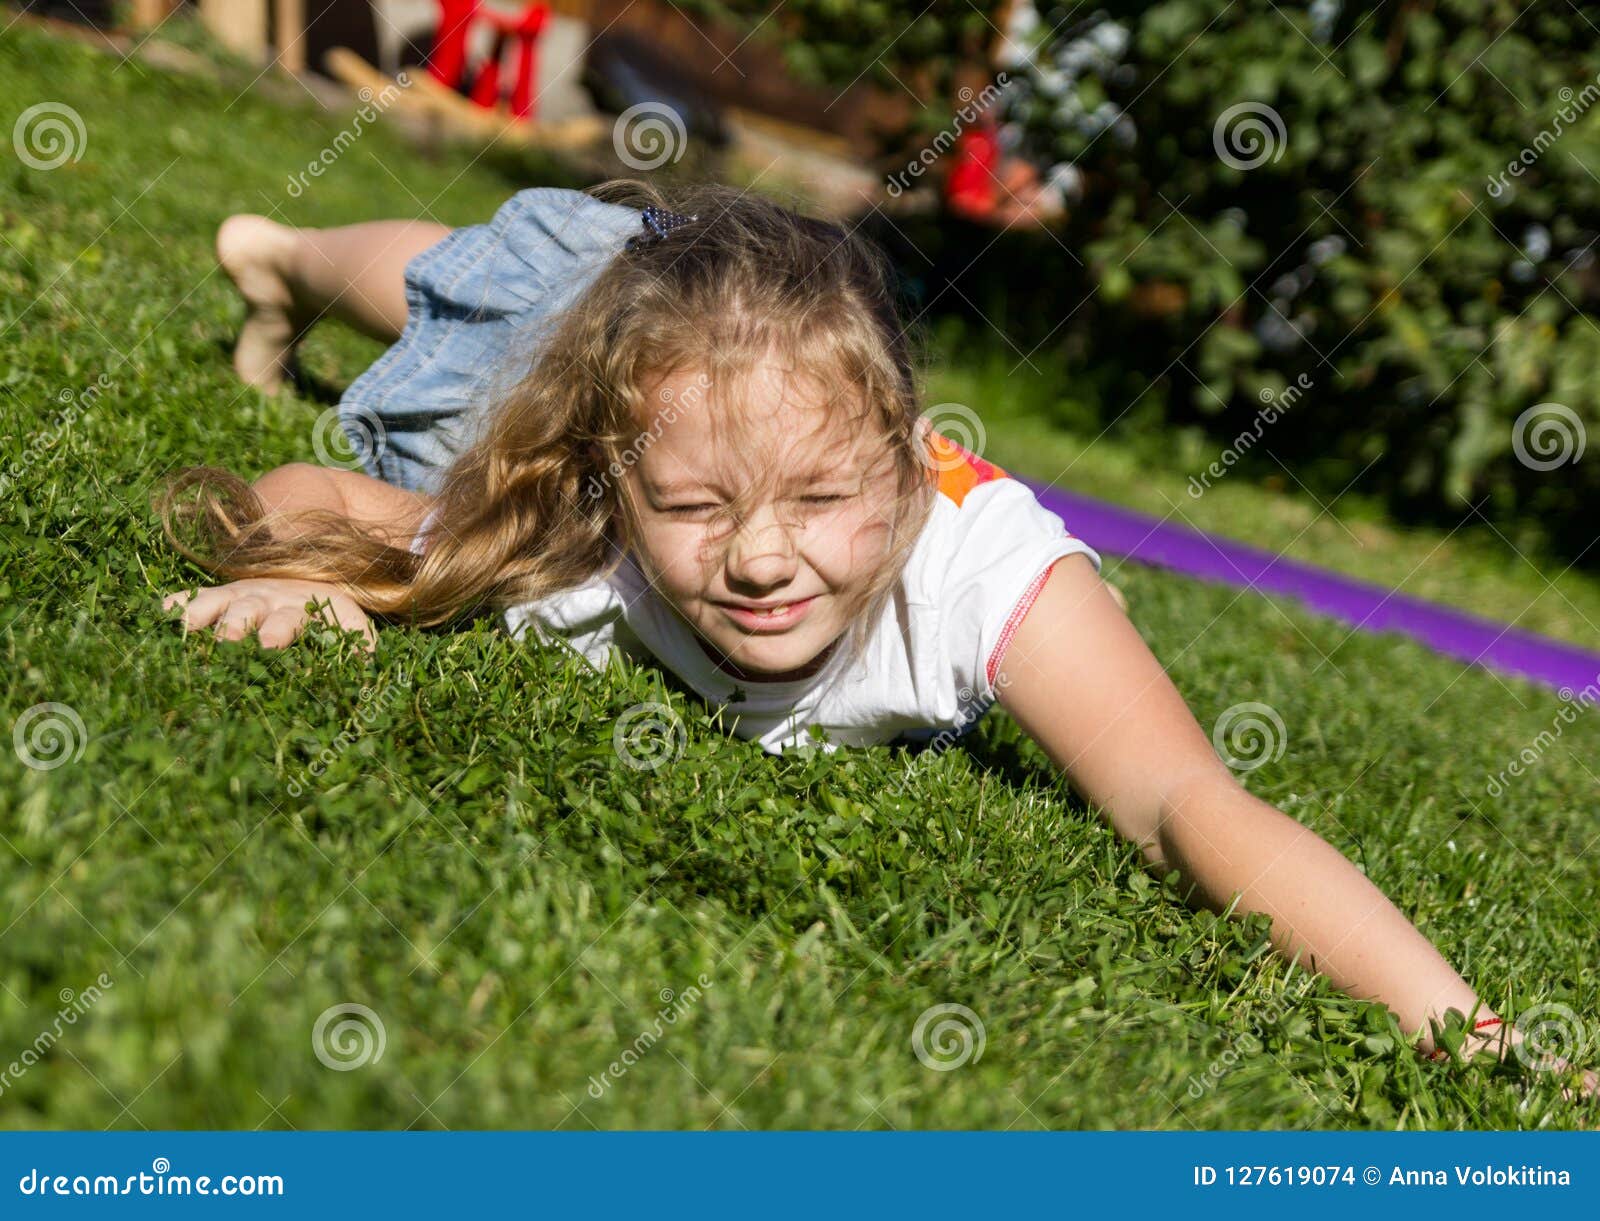 Playful Happy Little Girl Resting on a Grass in Summer Park Stock Photo